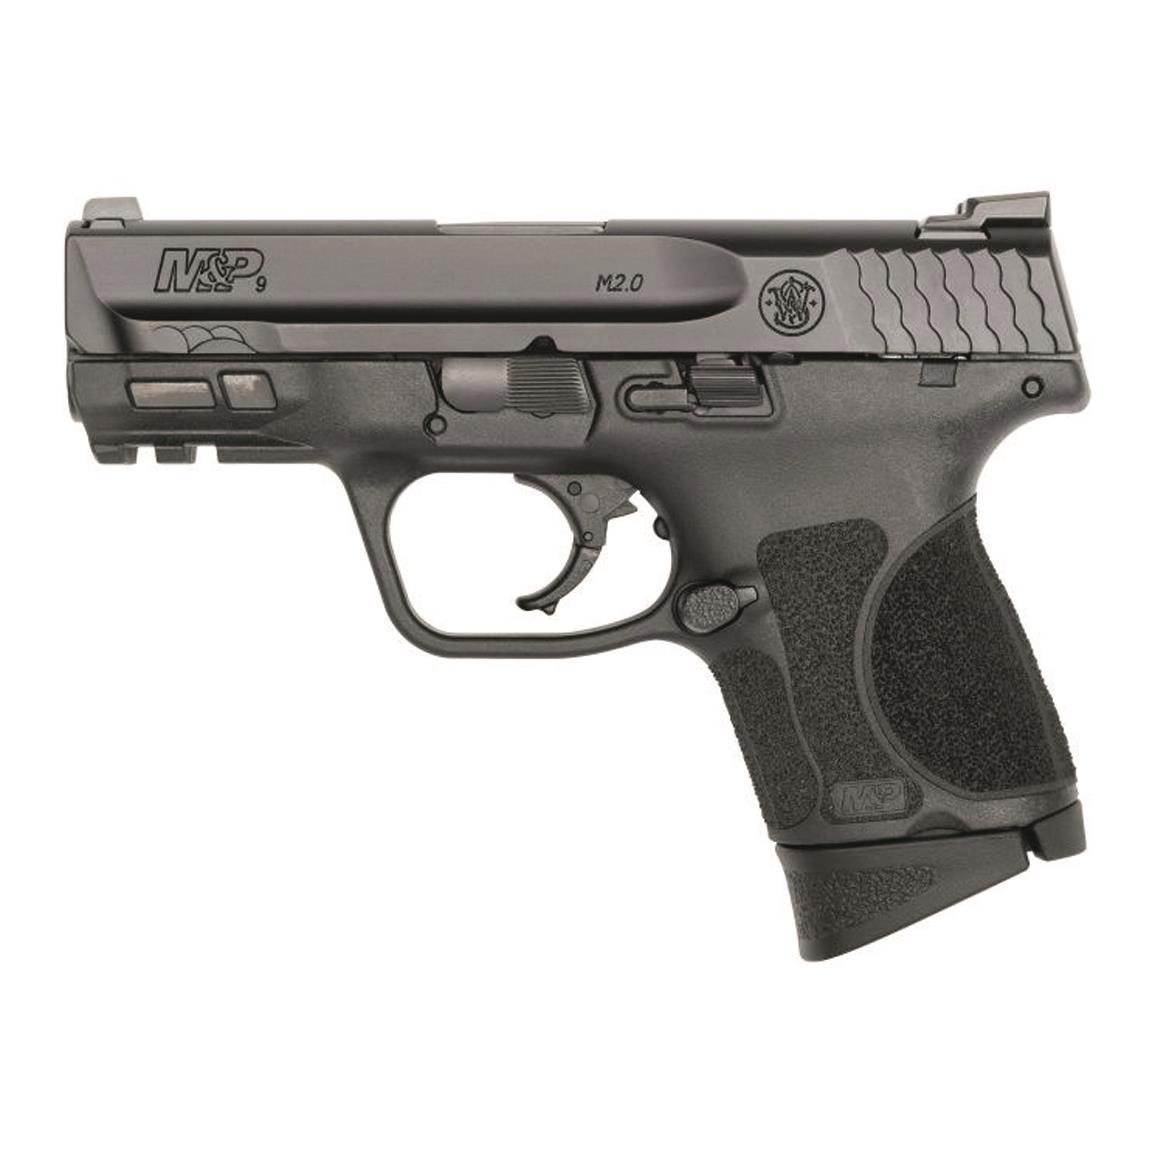 Smith & Wesson M&P9 M2.0 Subcompact, Semi-automatic, 9mm, 3.6" Barrel, No Thumb Safety, 12+1 Rds.